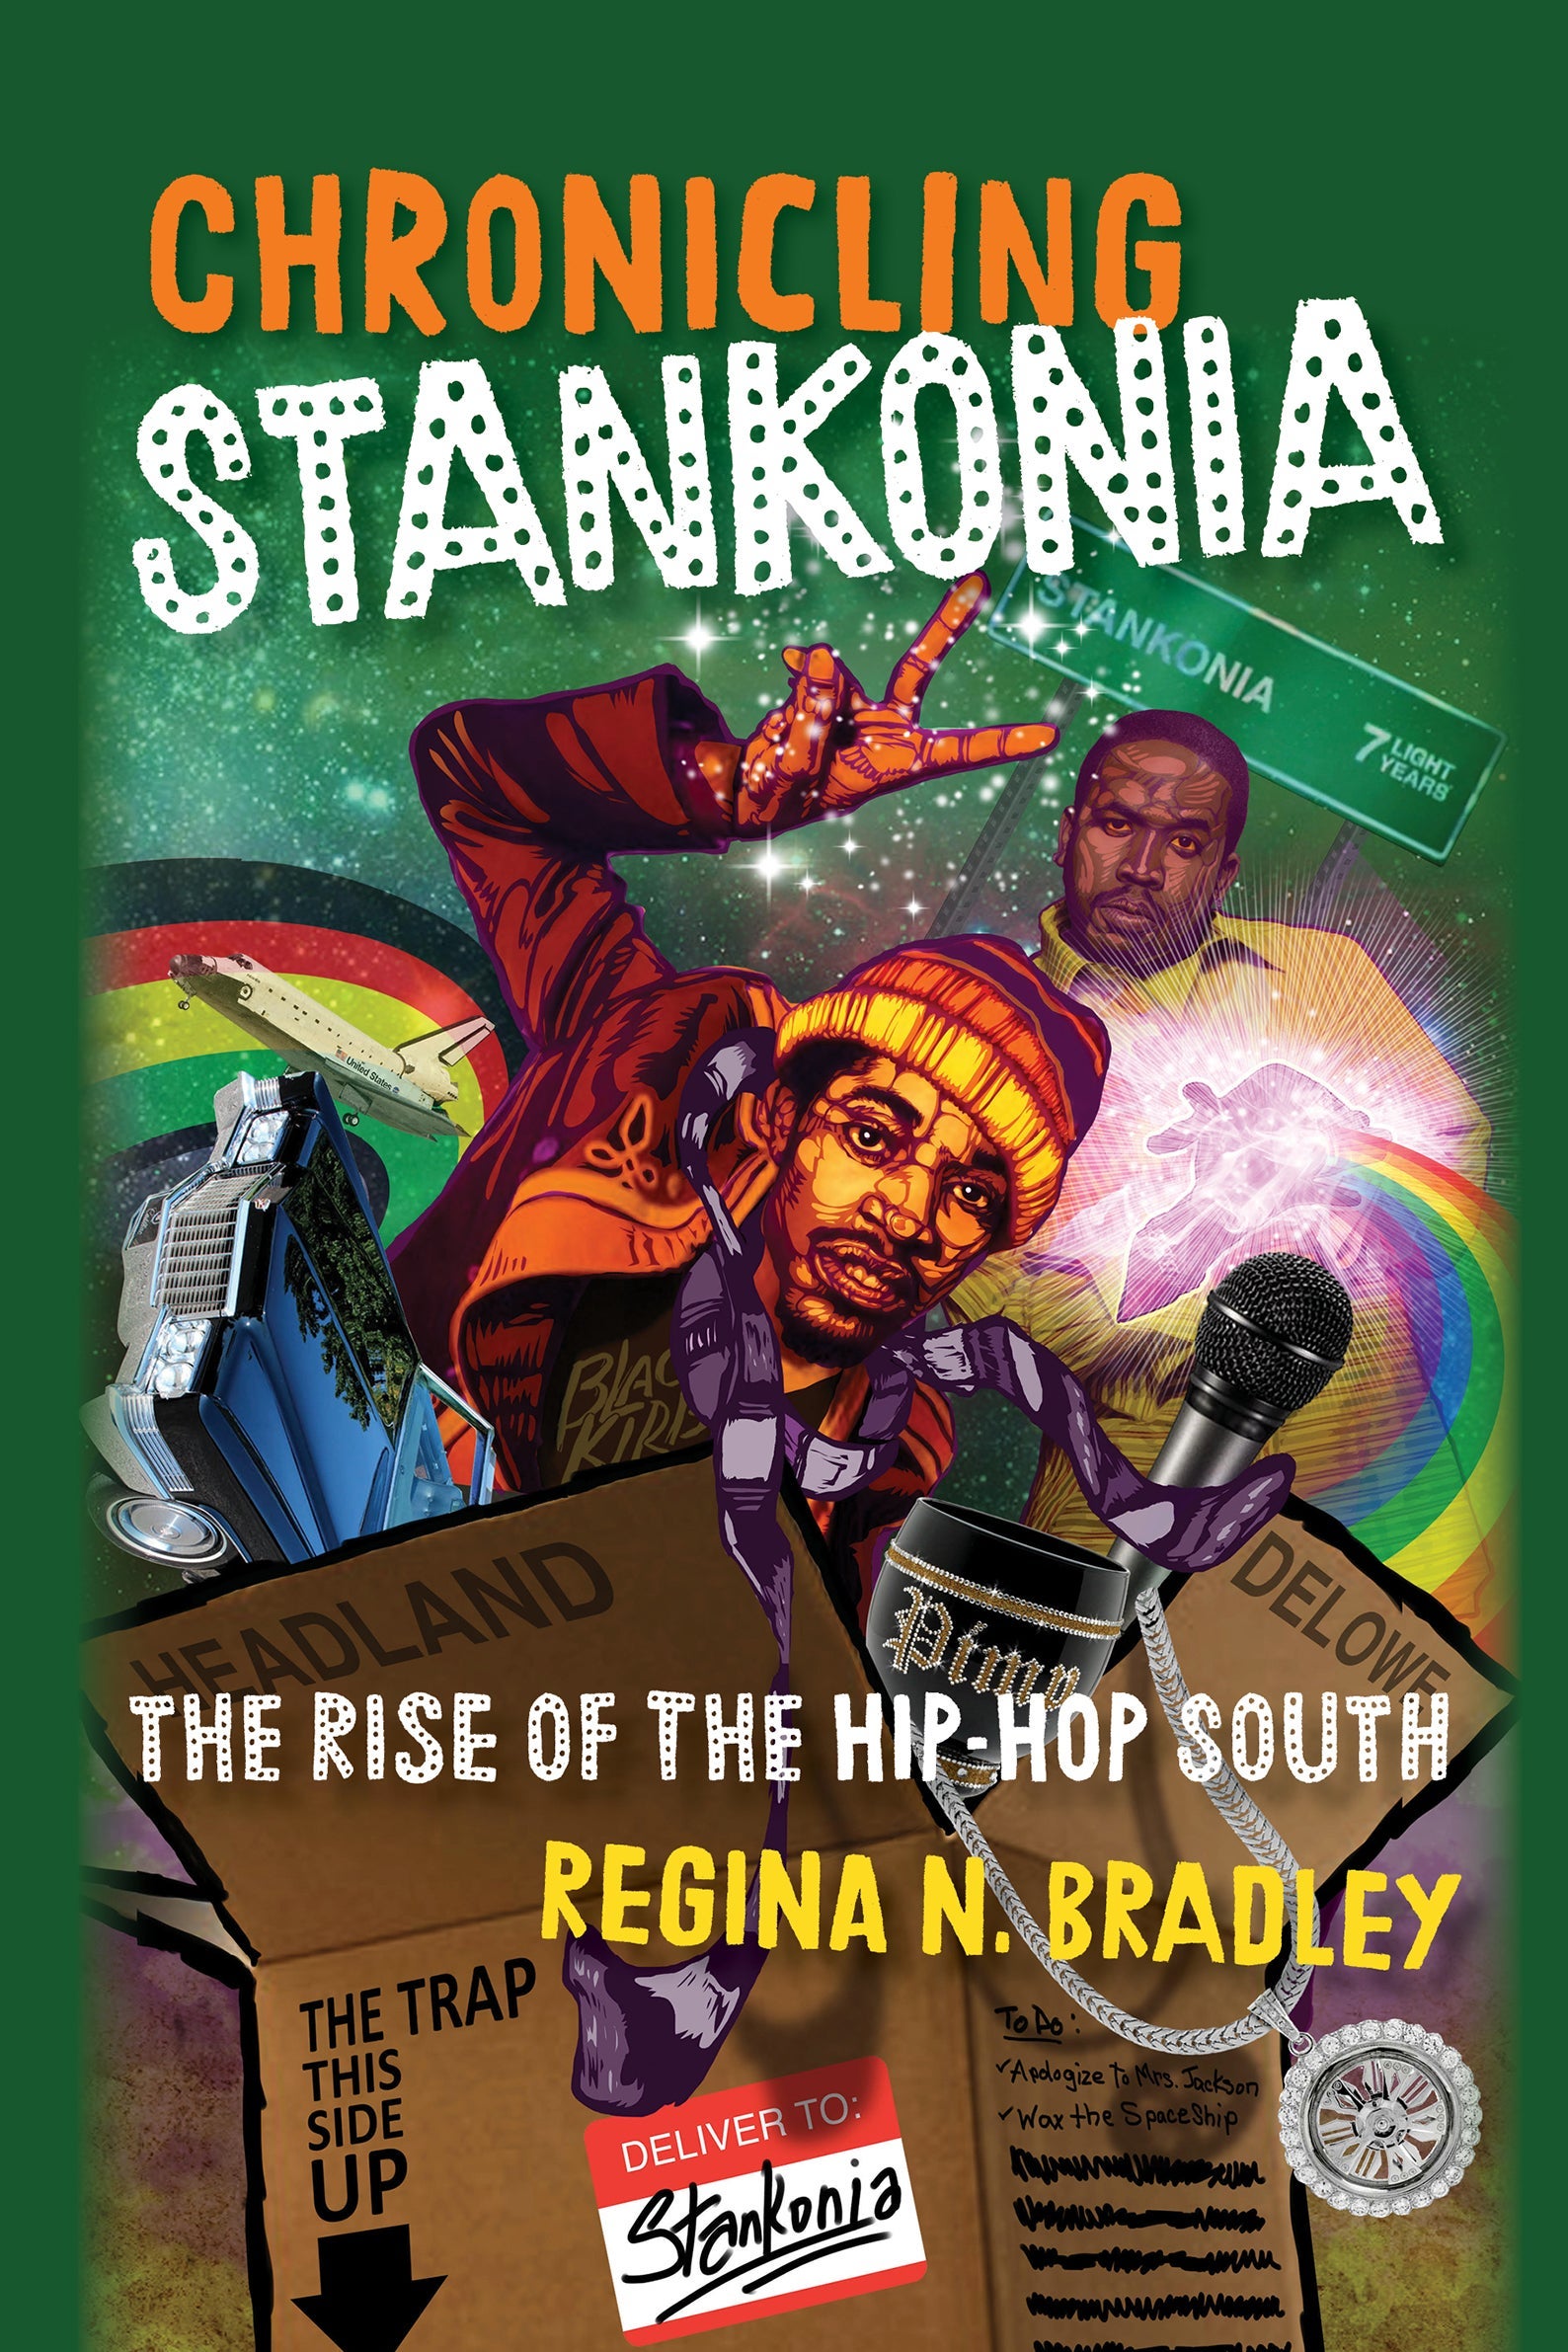 The book cover for Chronicling Stankonia has a green background with illustrations of André 300 and Big Boi surrounded by rainbows and coming out of a cardboard box. 